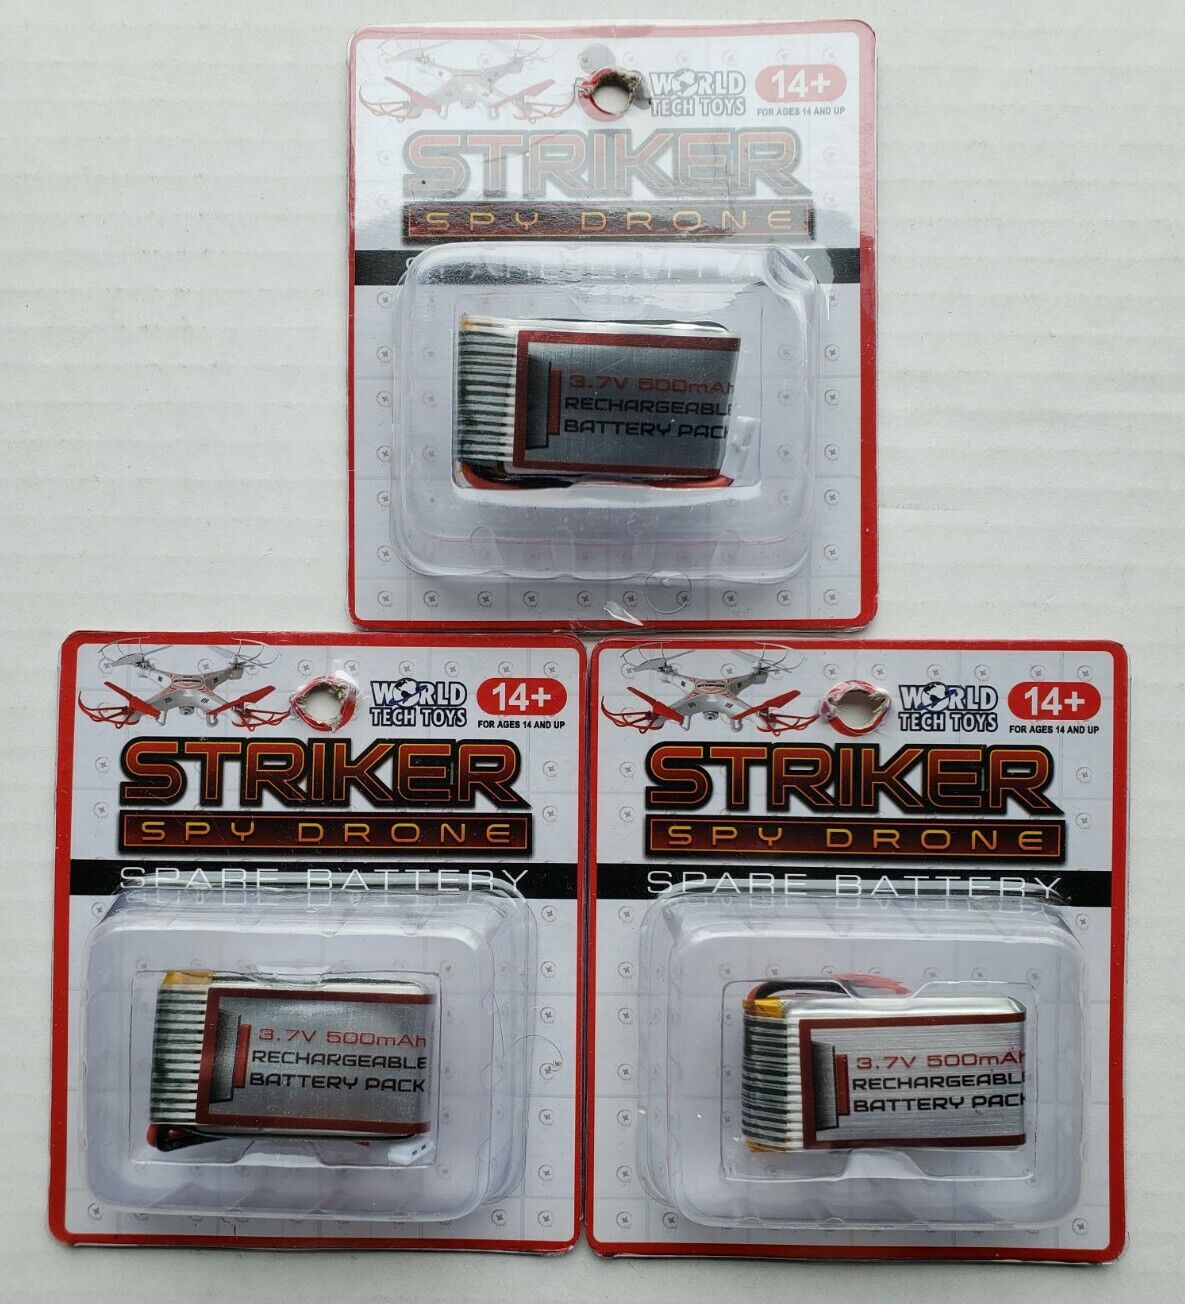 World Tech Toys Striker Spy Drone Spare Replacement 3.7V Battery Lot of 3 New